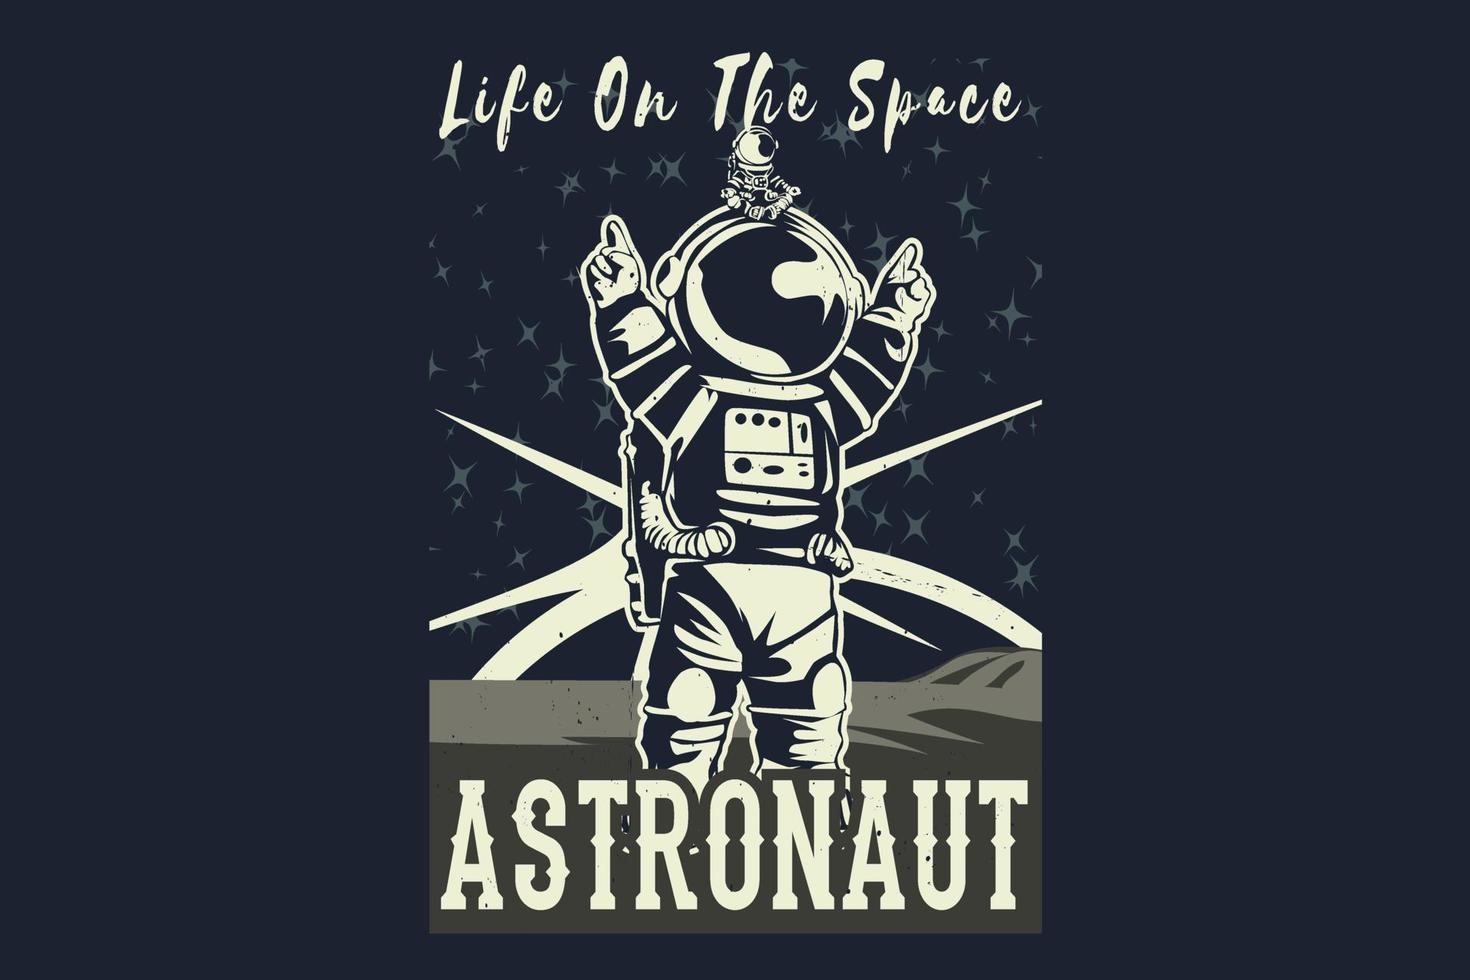 Life on the space astronaut silhouette design vector